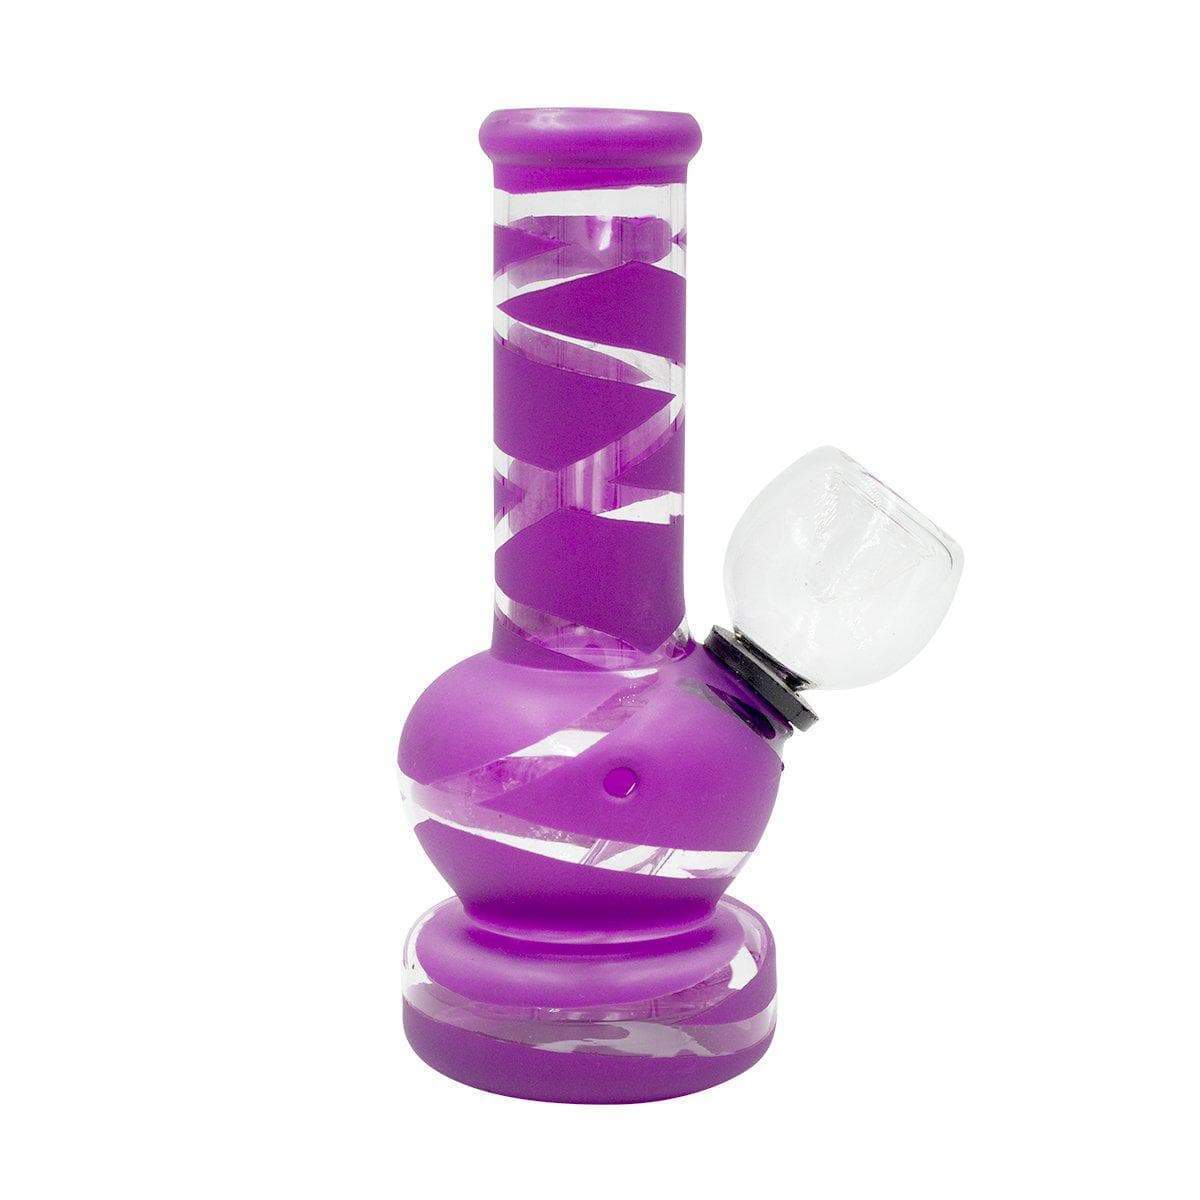 5-inch mini carb bong smoking device clear mouthpiece sleek striped design hot purple color